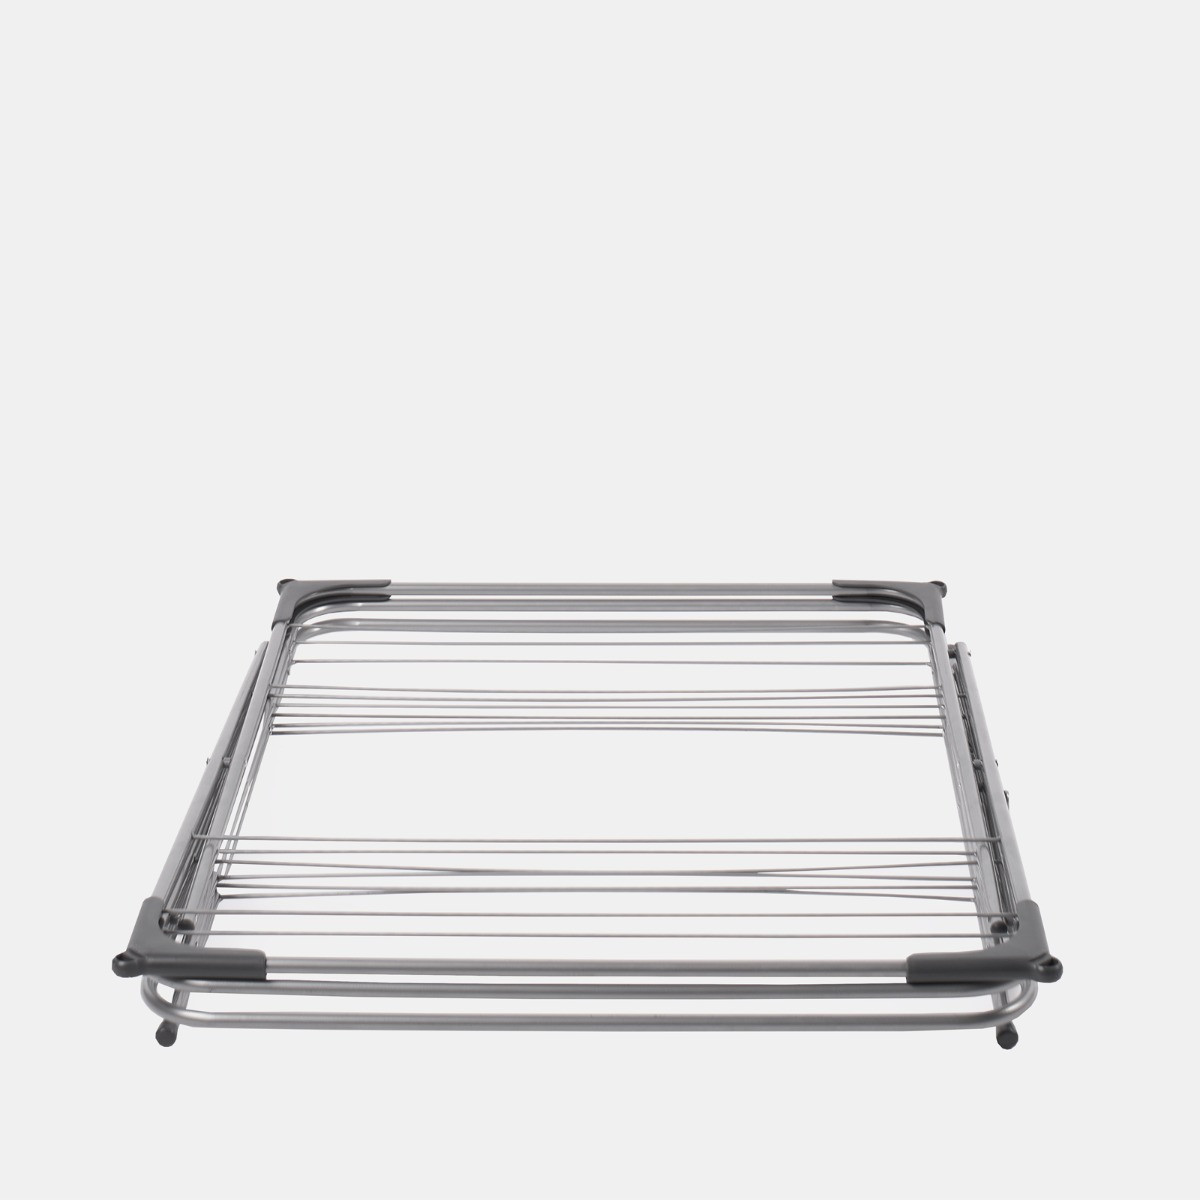 OHS 3 Tier Foldable Clothes Airer, Grey - 15M>